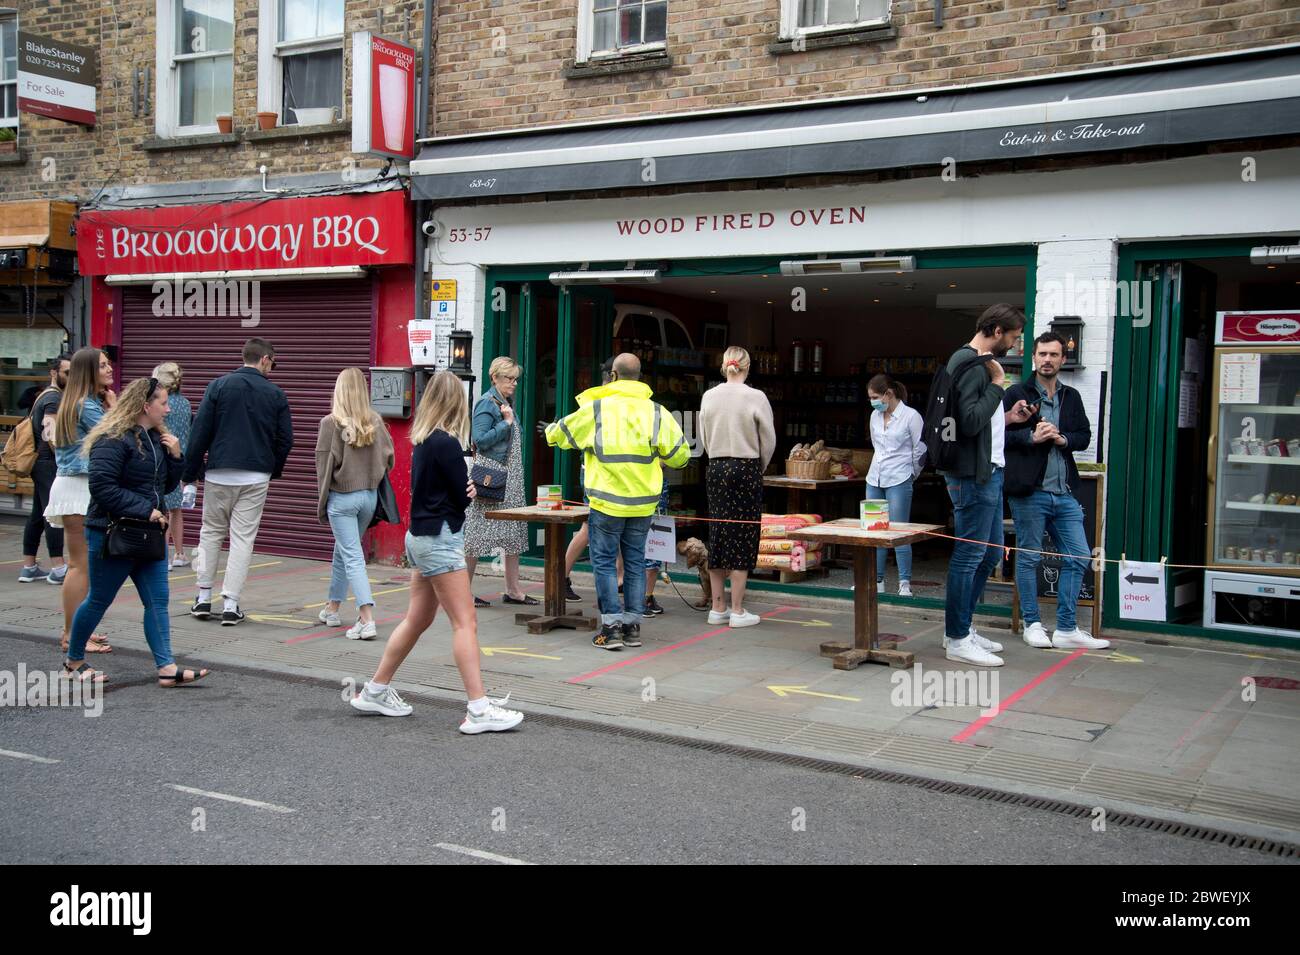 London May 2020 The Covid-19 pandemic. Broadway market. Socially distanced queue outside Bella Italia restaurant, now selling ingredients rather than Stock Photo